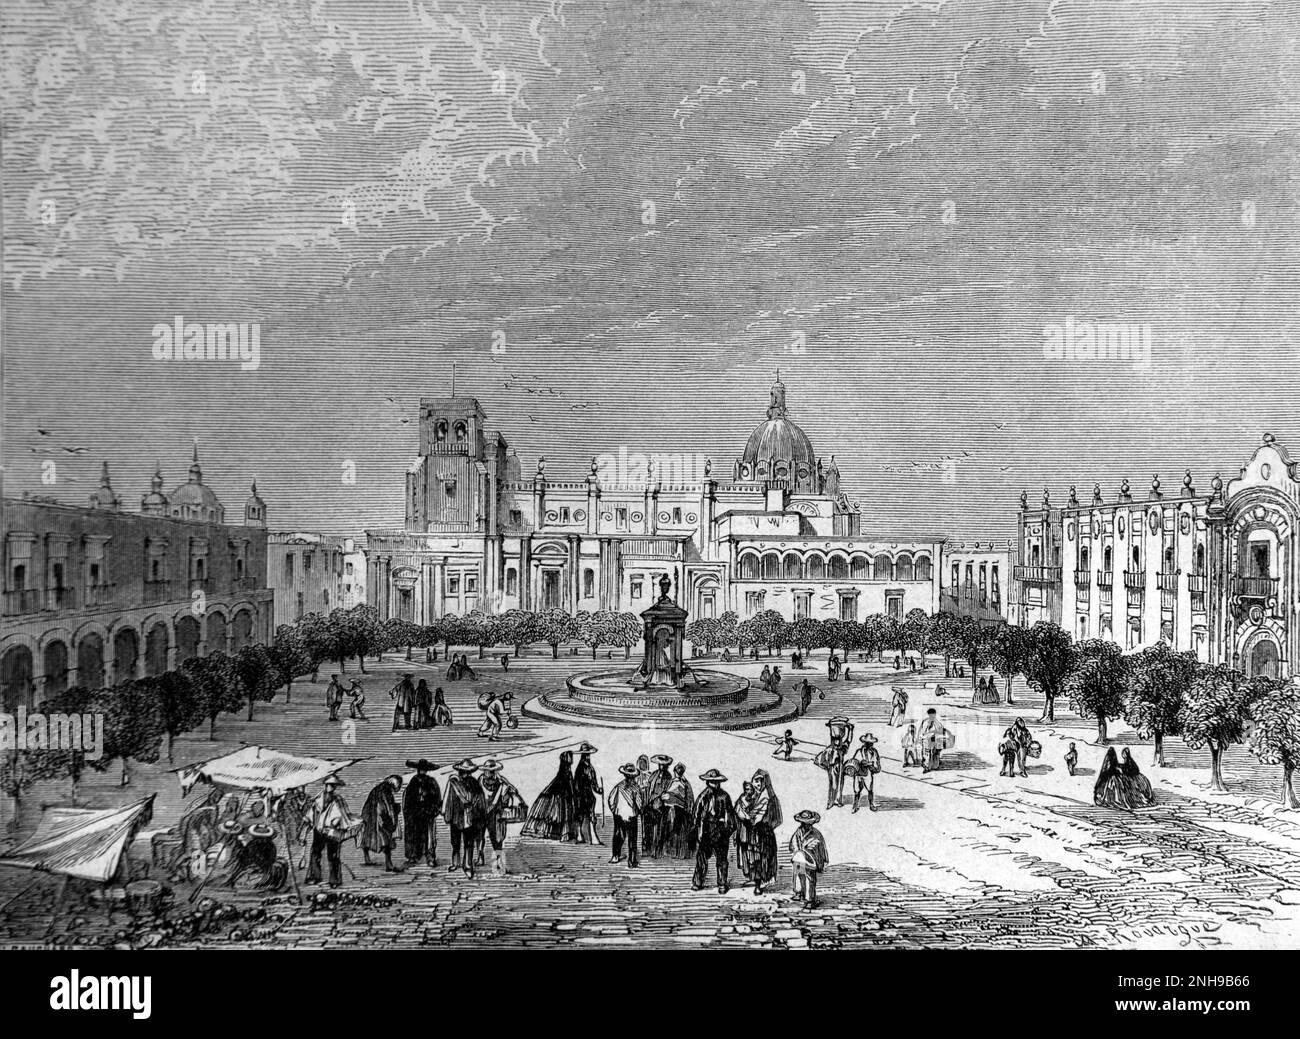 Early View of Plaza de Armas in the Town Centre, Old Town or Historic District with Cathedral & Palace of Guadalajara Jalisco, Mexico. Vintage Engraving or Illustration 1862 Stock Photo